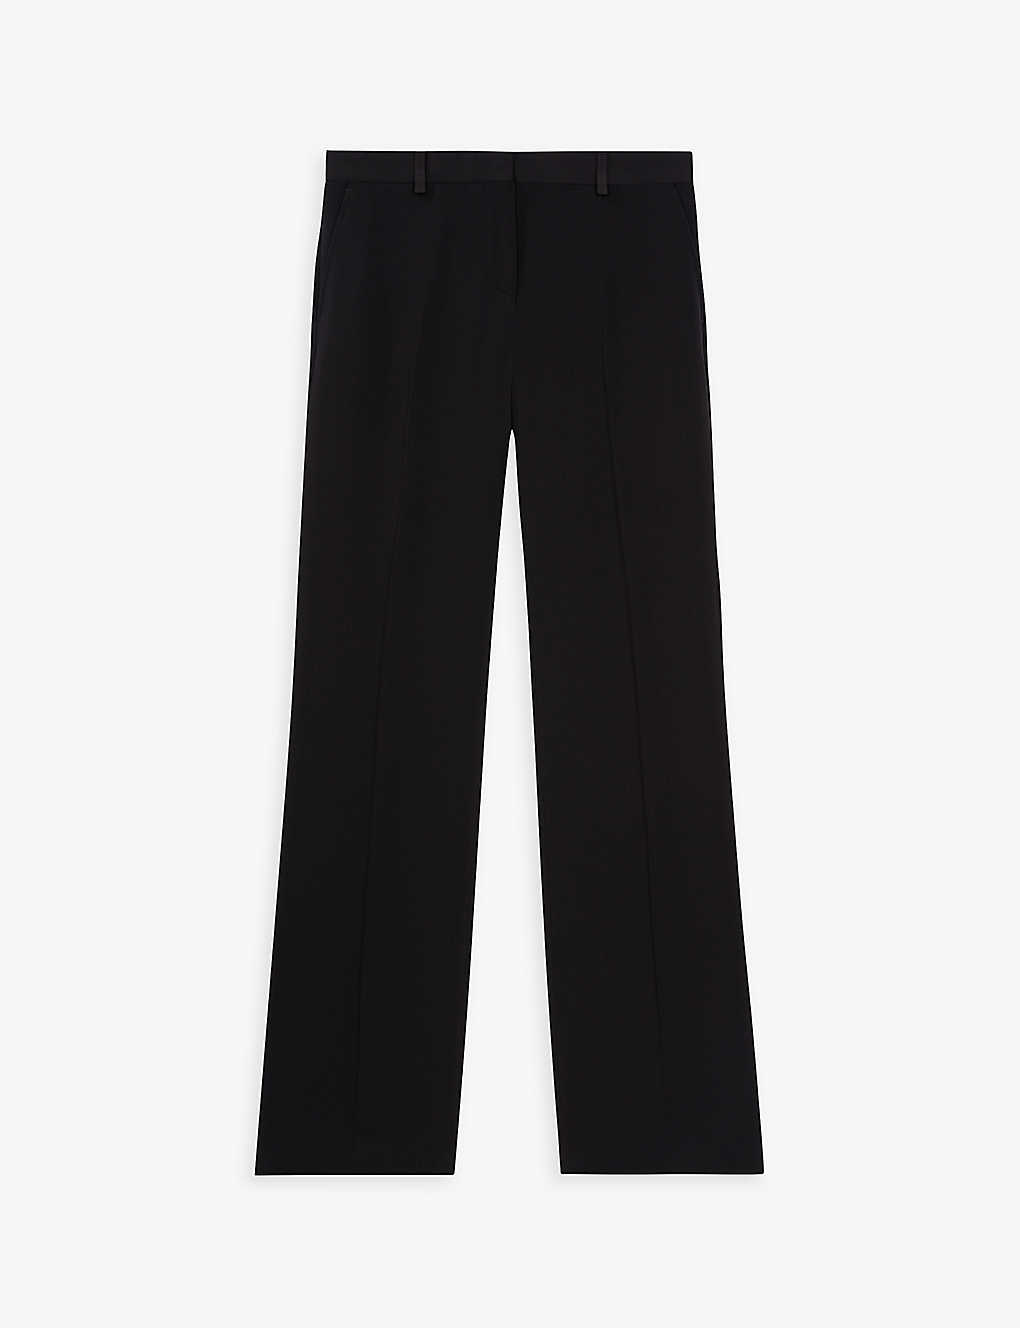 THE KOOPLES THE KOOPLES WOMENS BLACK HIGH-RISE STRAIGHT-LEG WOVEN TROUSERS